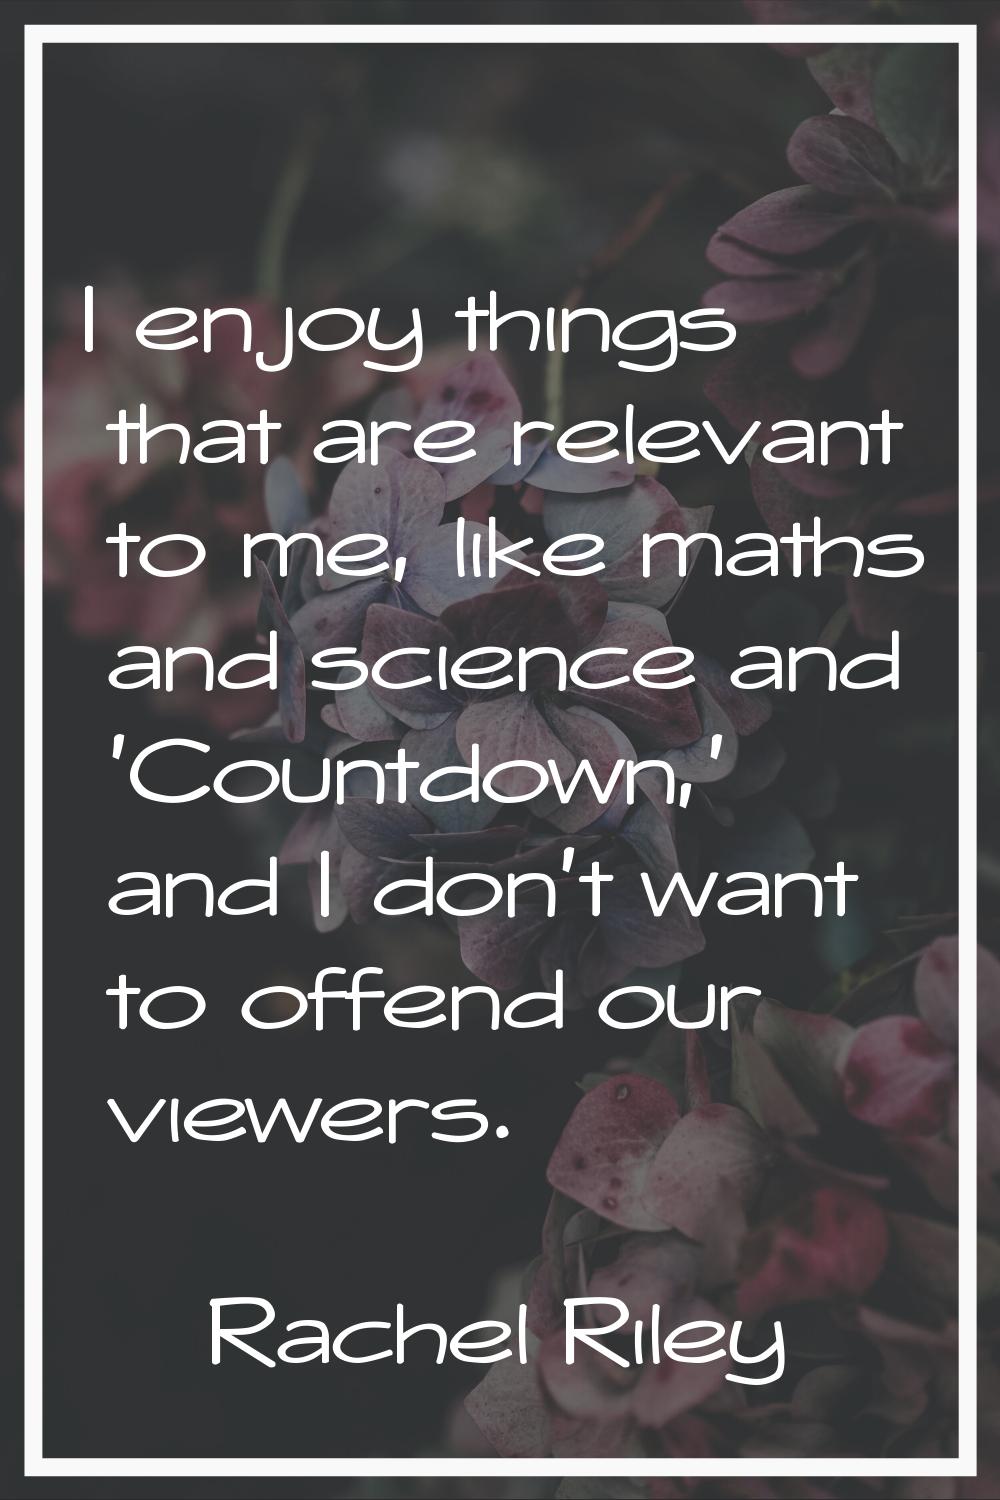 I enjoy things that are relevant to me, like maths and science and 'Countdown,' and I don't want to